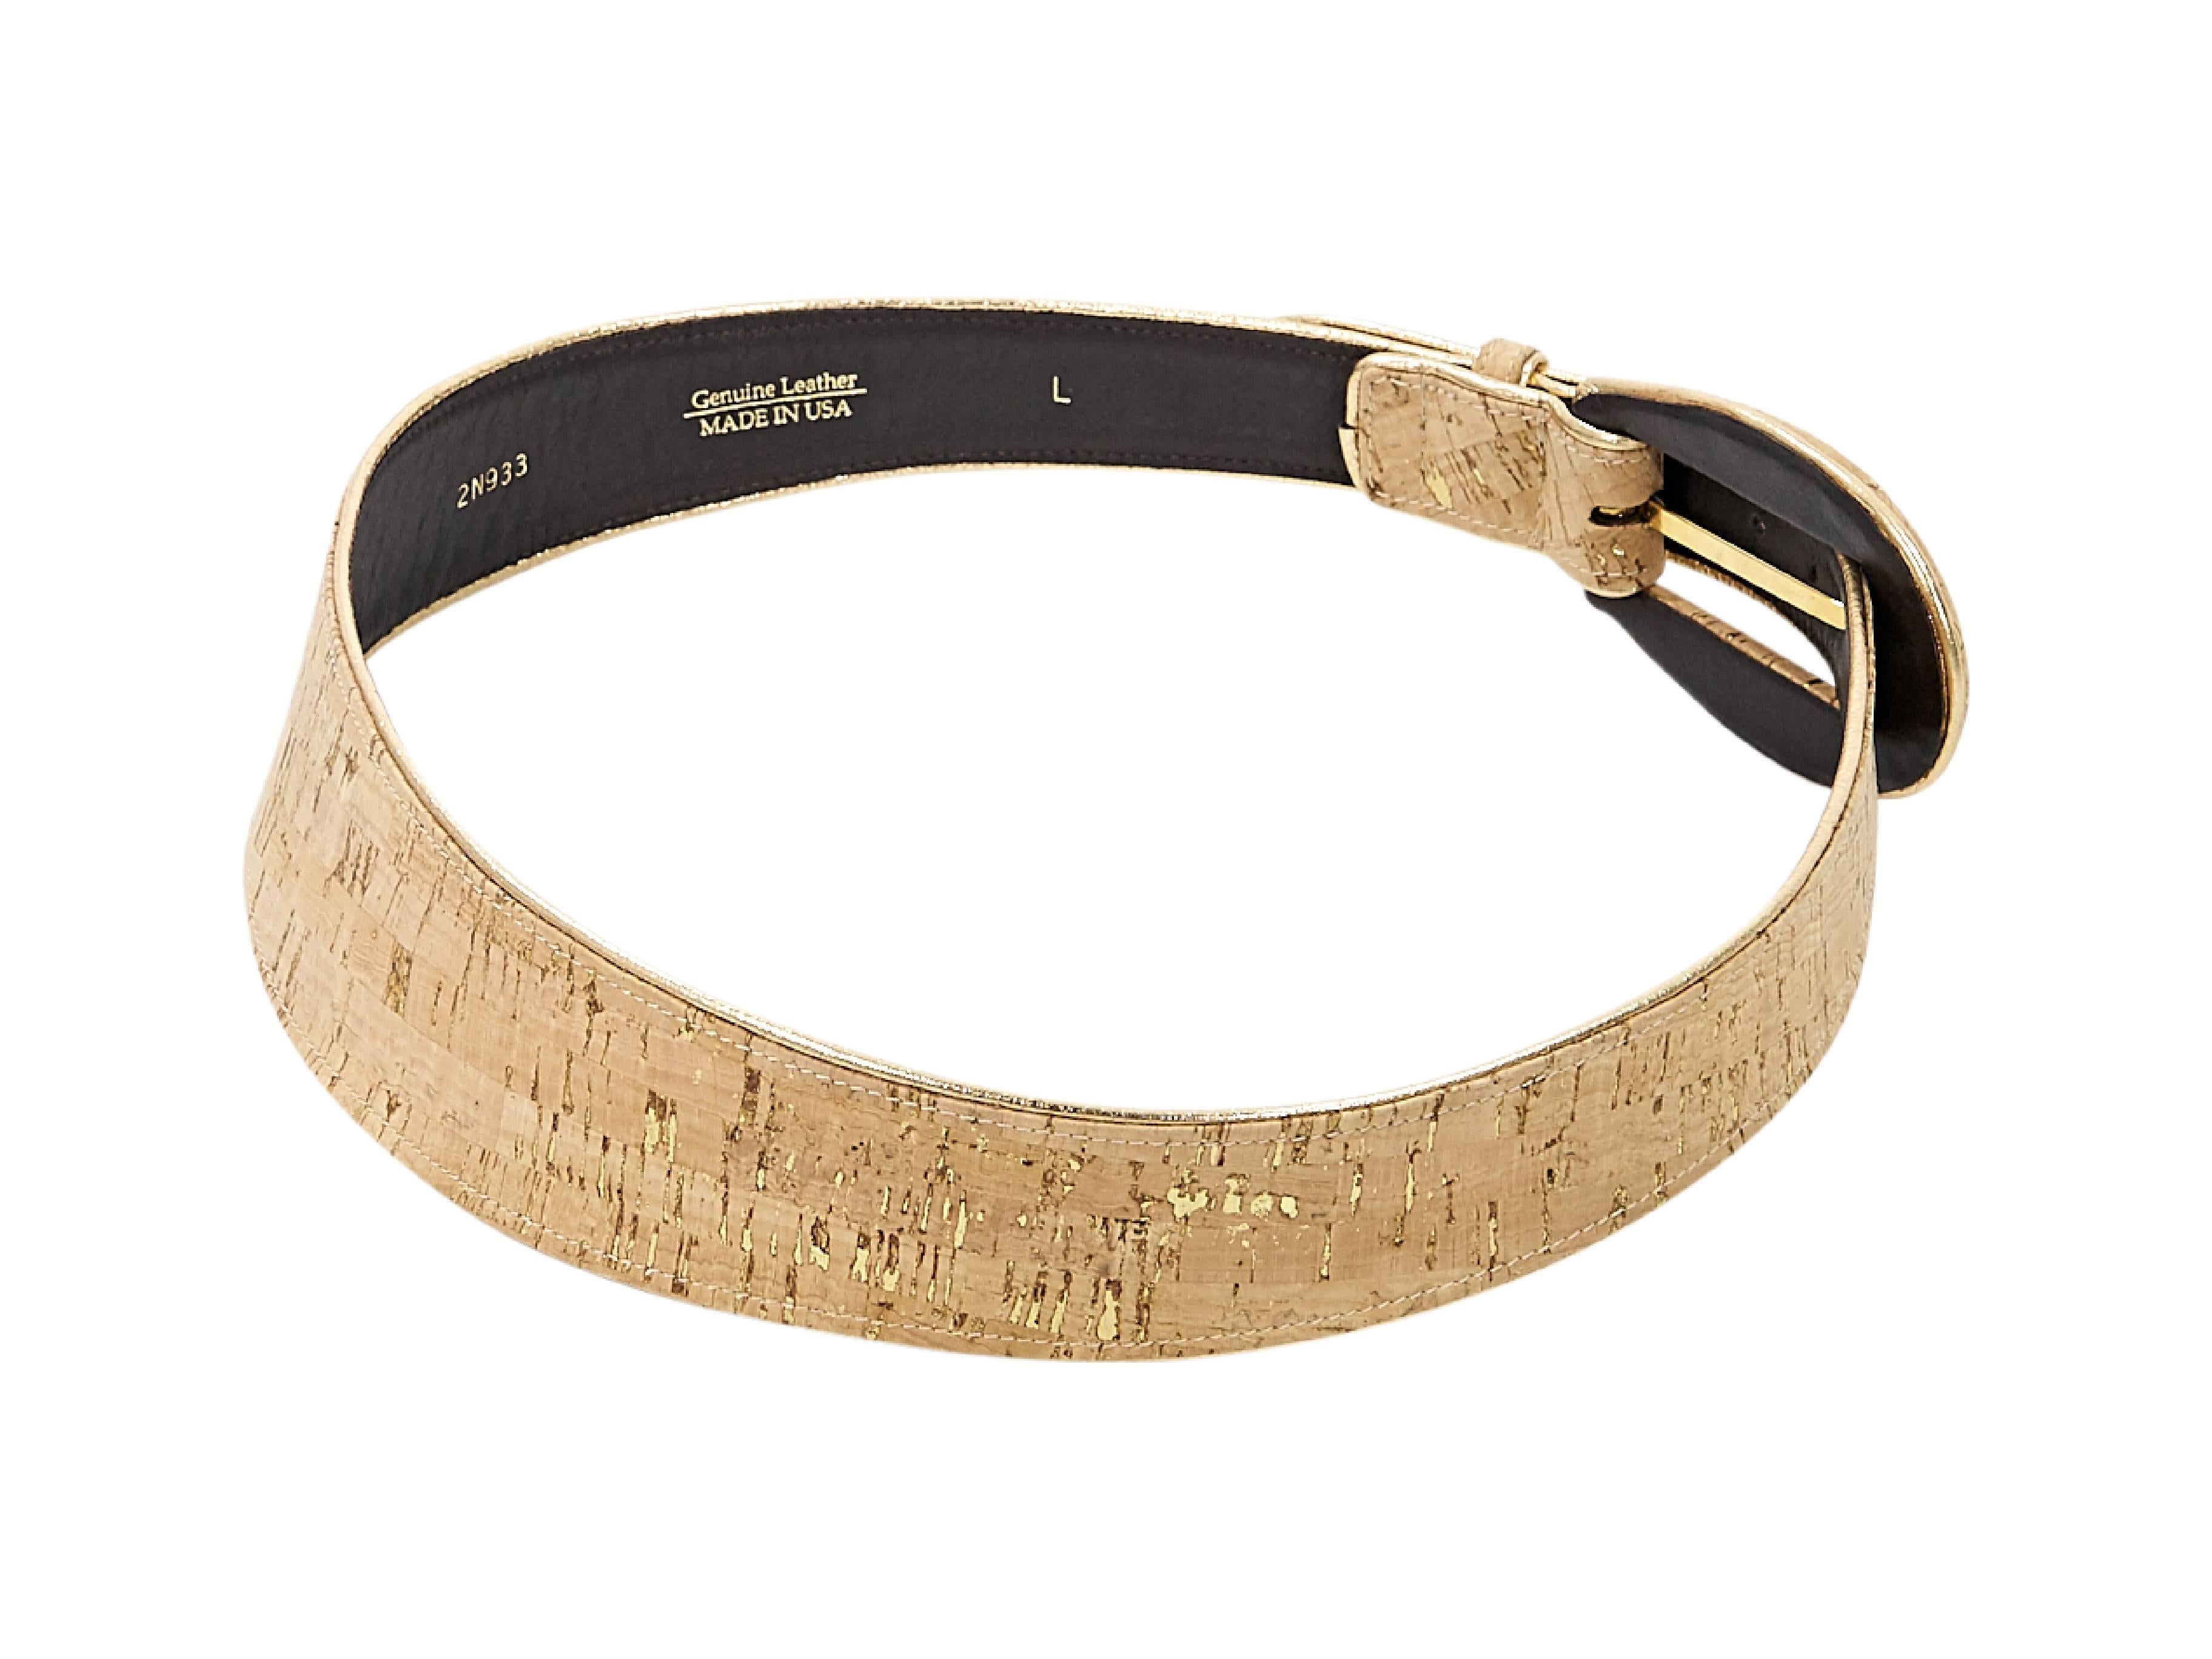 Product details:  Tan cork belt by Oscar de la Renta.  Adjustable buckle closure.  Goldtone hardware. Size L. Length to first hole- 80 cm/31.5 inches, Length to last hole- 90 cm/ 35.5 inches 
Condition: Pre-owned. Very good. 

Est. Retail $ 598.00
